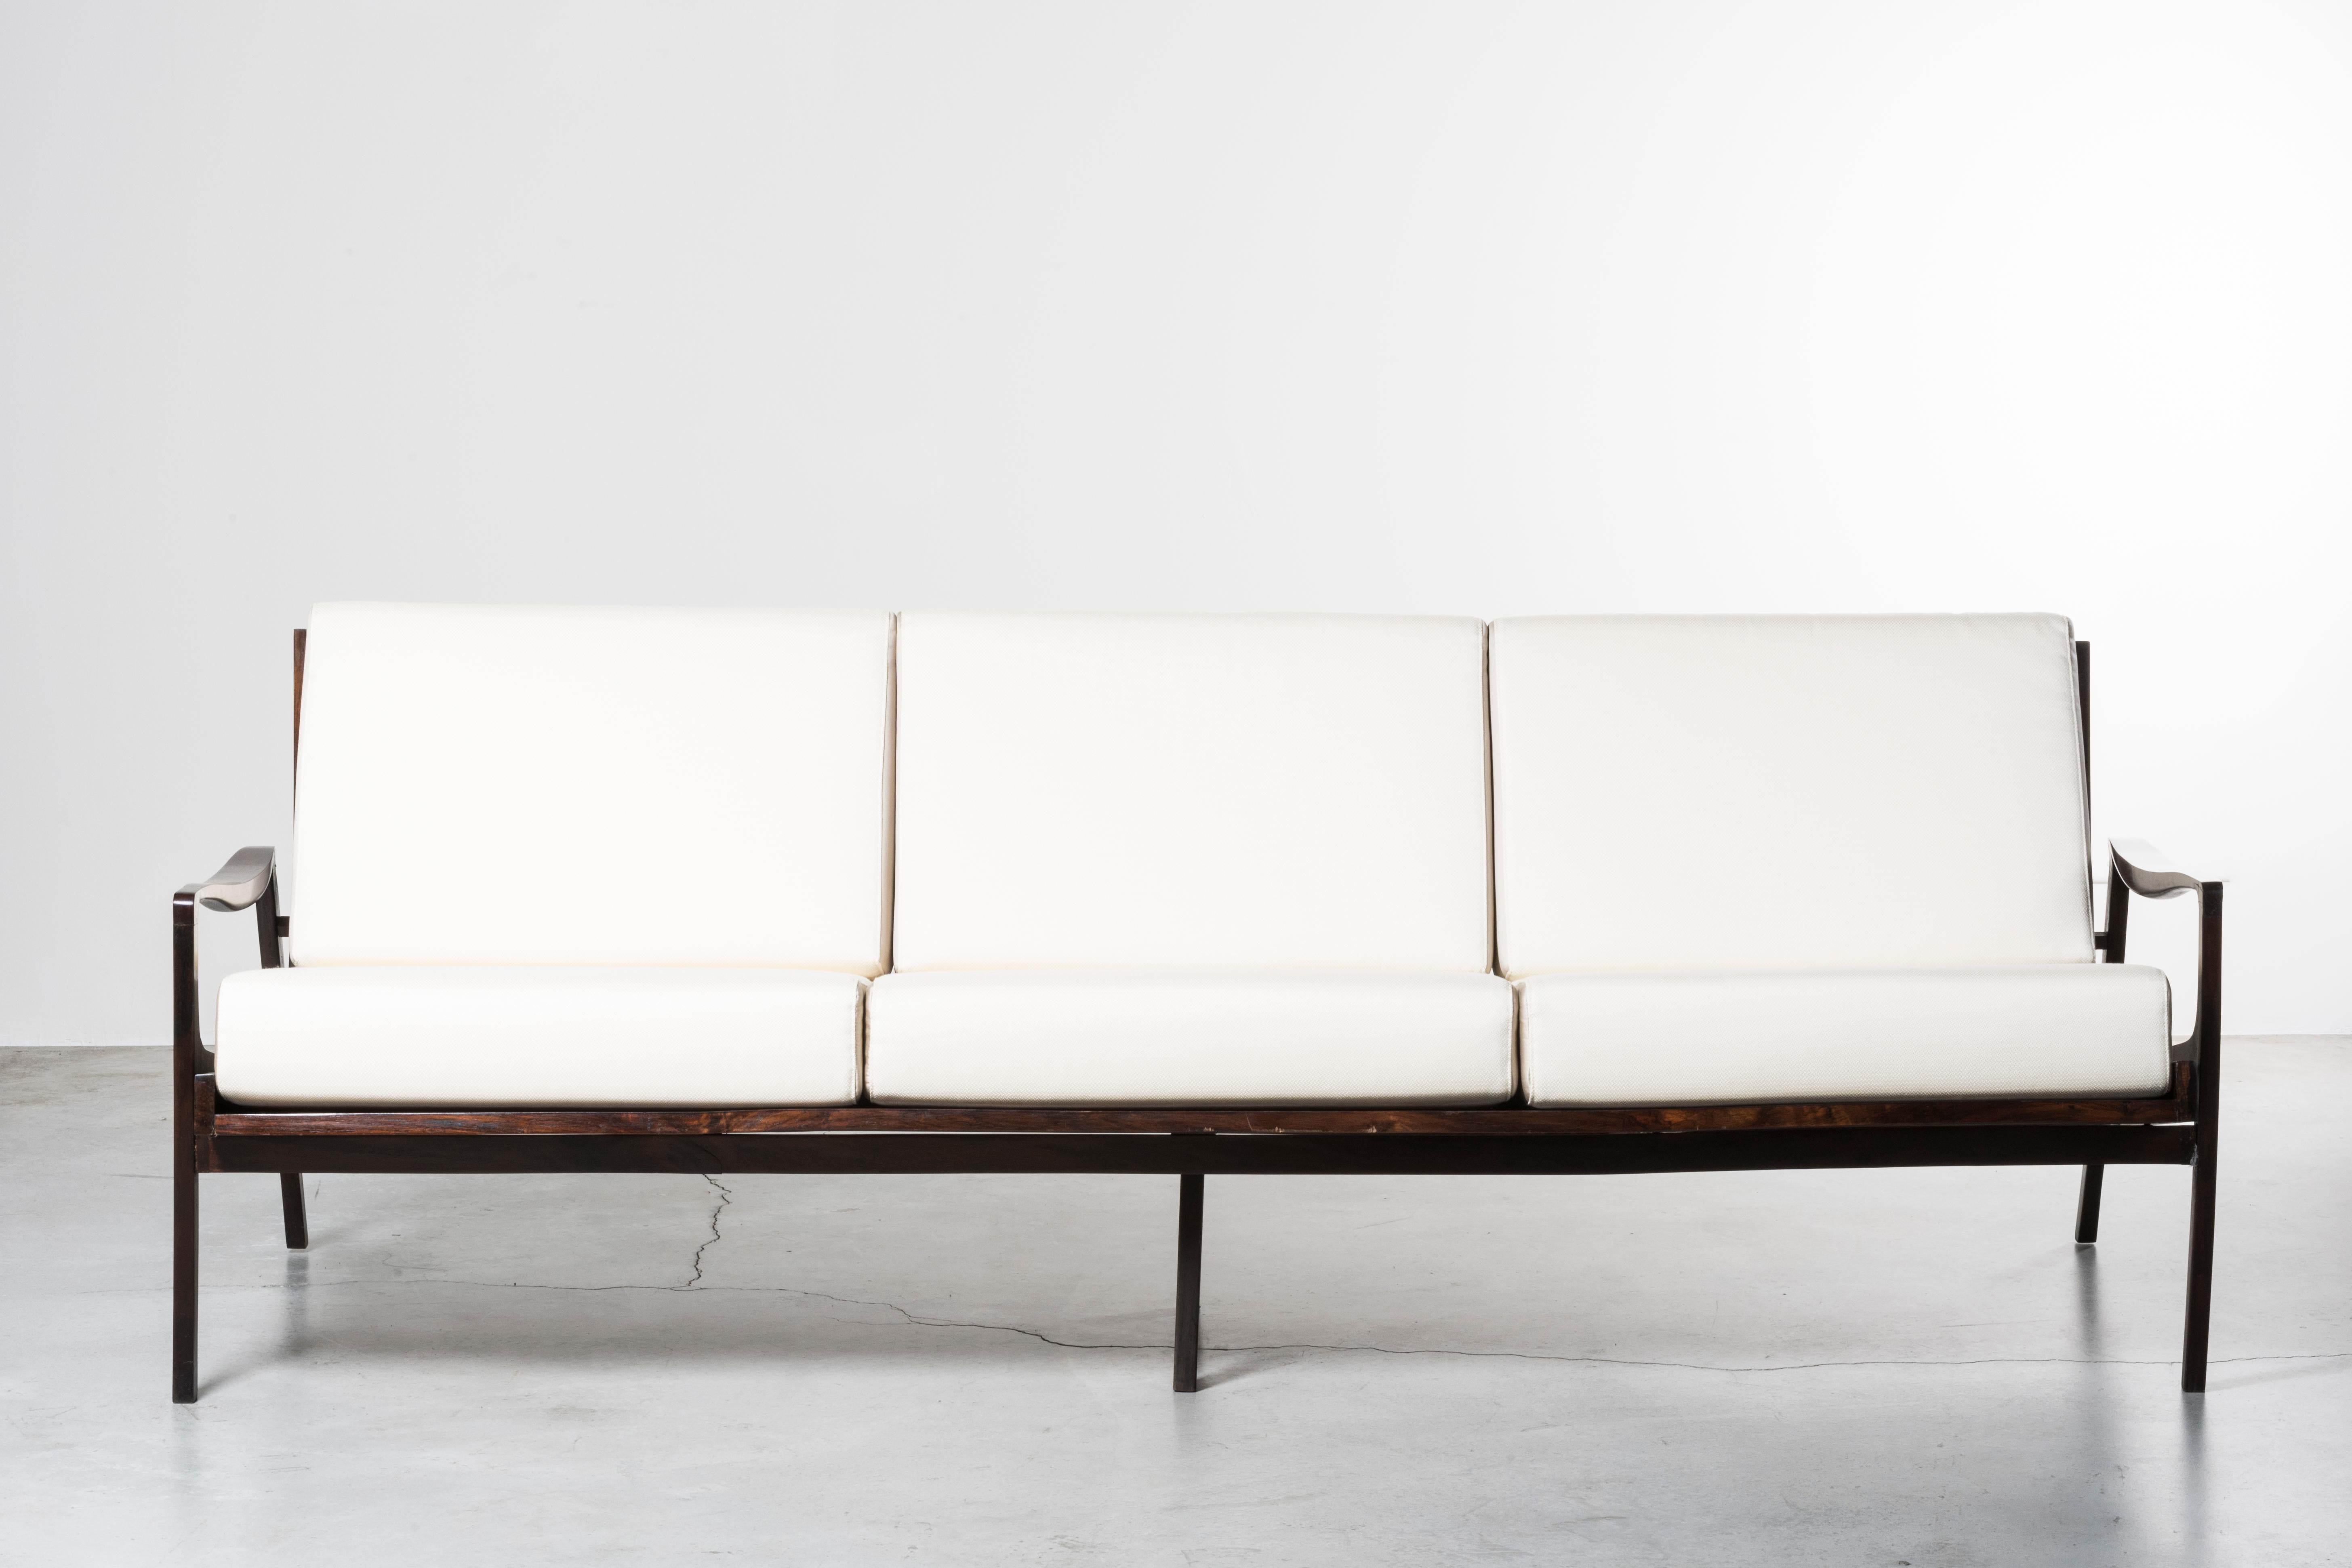 Lounge sofa
Brazil, 1958
Manufactured by Lyc¸eu de Artes e Officios
Brazilian ironwood, fabric upholstery

220 x 90 x H 70 H seat 45 cm
86.6 x 35.4 x H 27.5 H seat 17.7 in

Please note: Prices do not include VAT. 
VAT may be applied depending on the